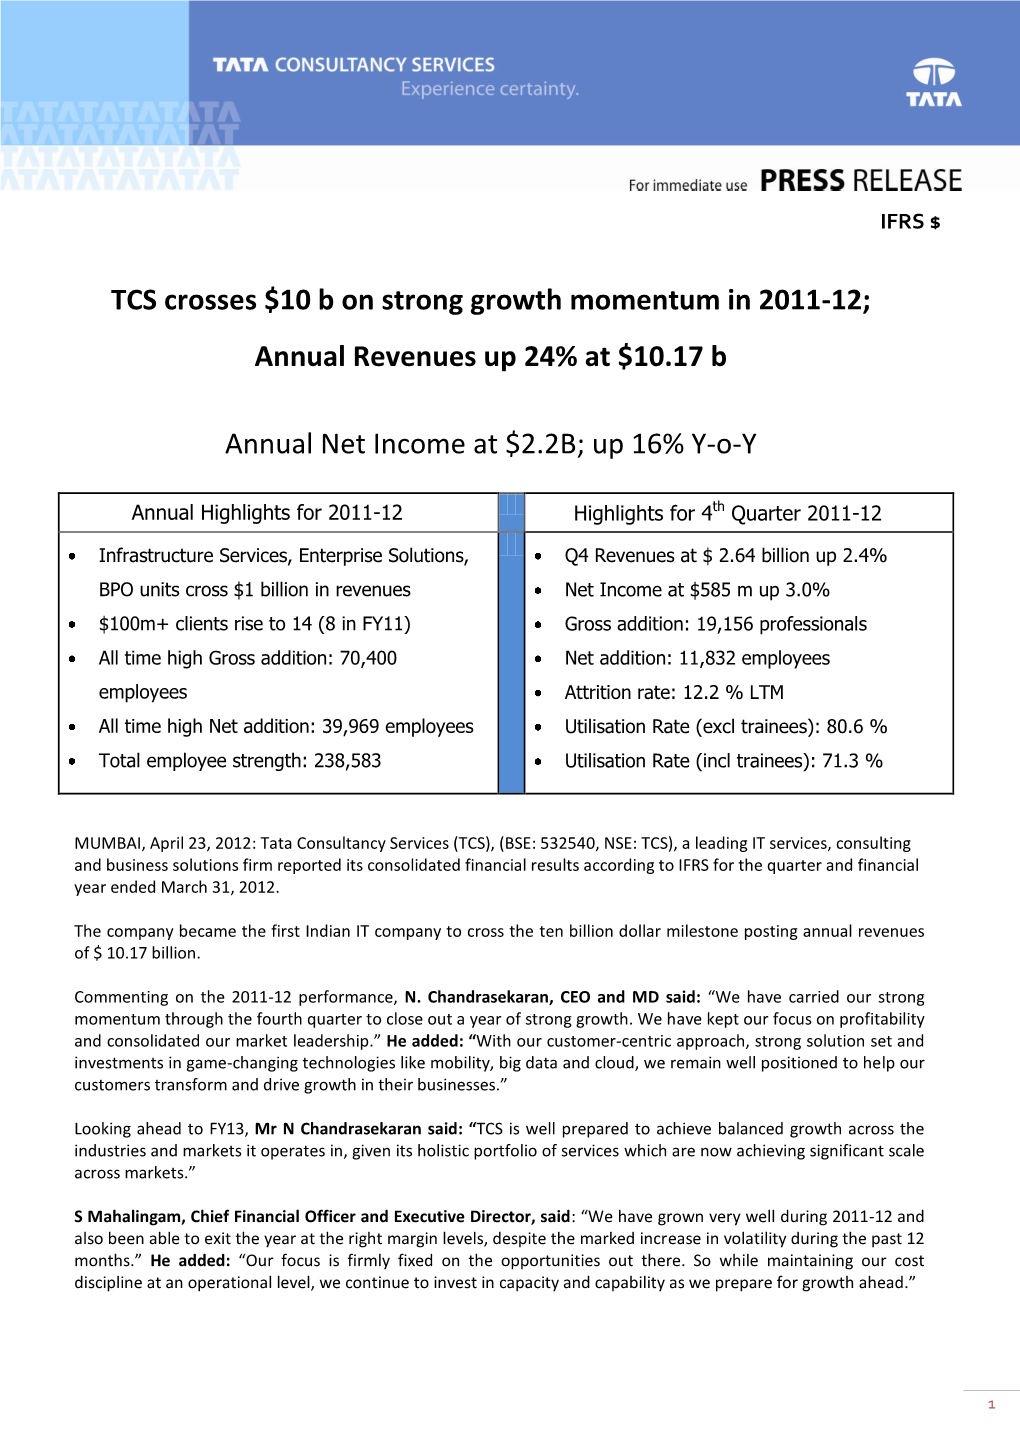 TCS Crosses $10 B on Strong Growth Momentum in 2011-12; Annual Revenues up 24% at $10.17 B